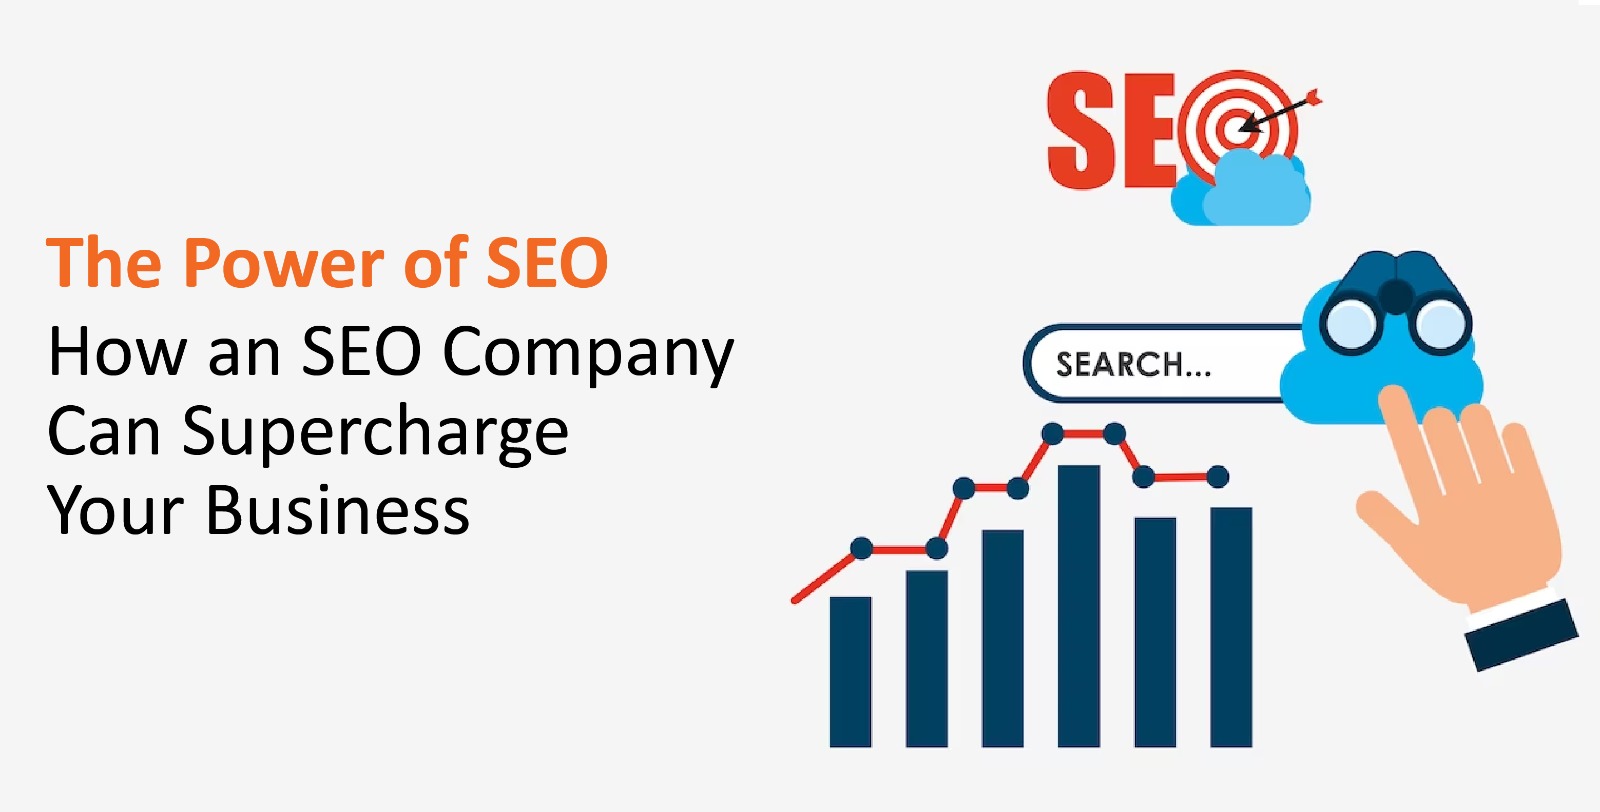 The Power of SEO: How an SEO Company Can Supercharge Your Business